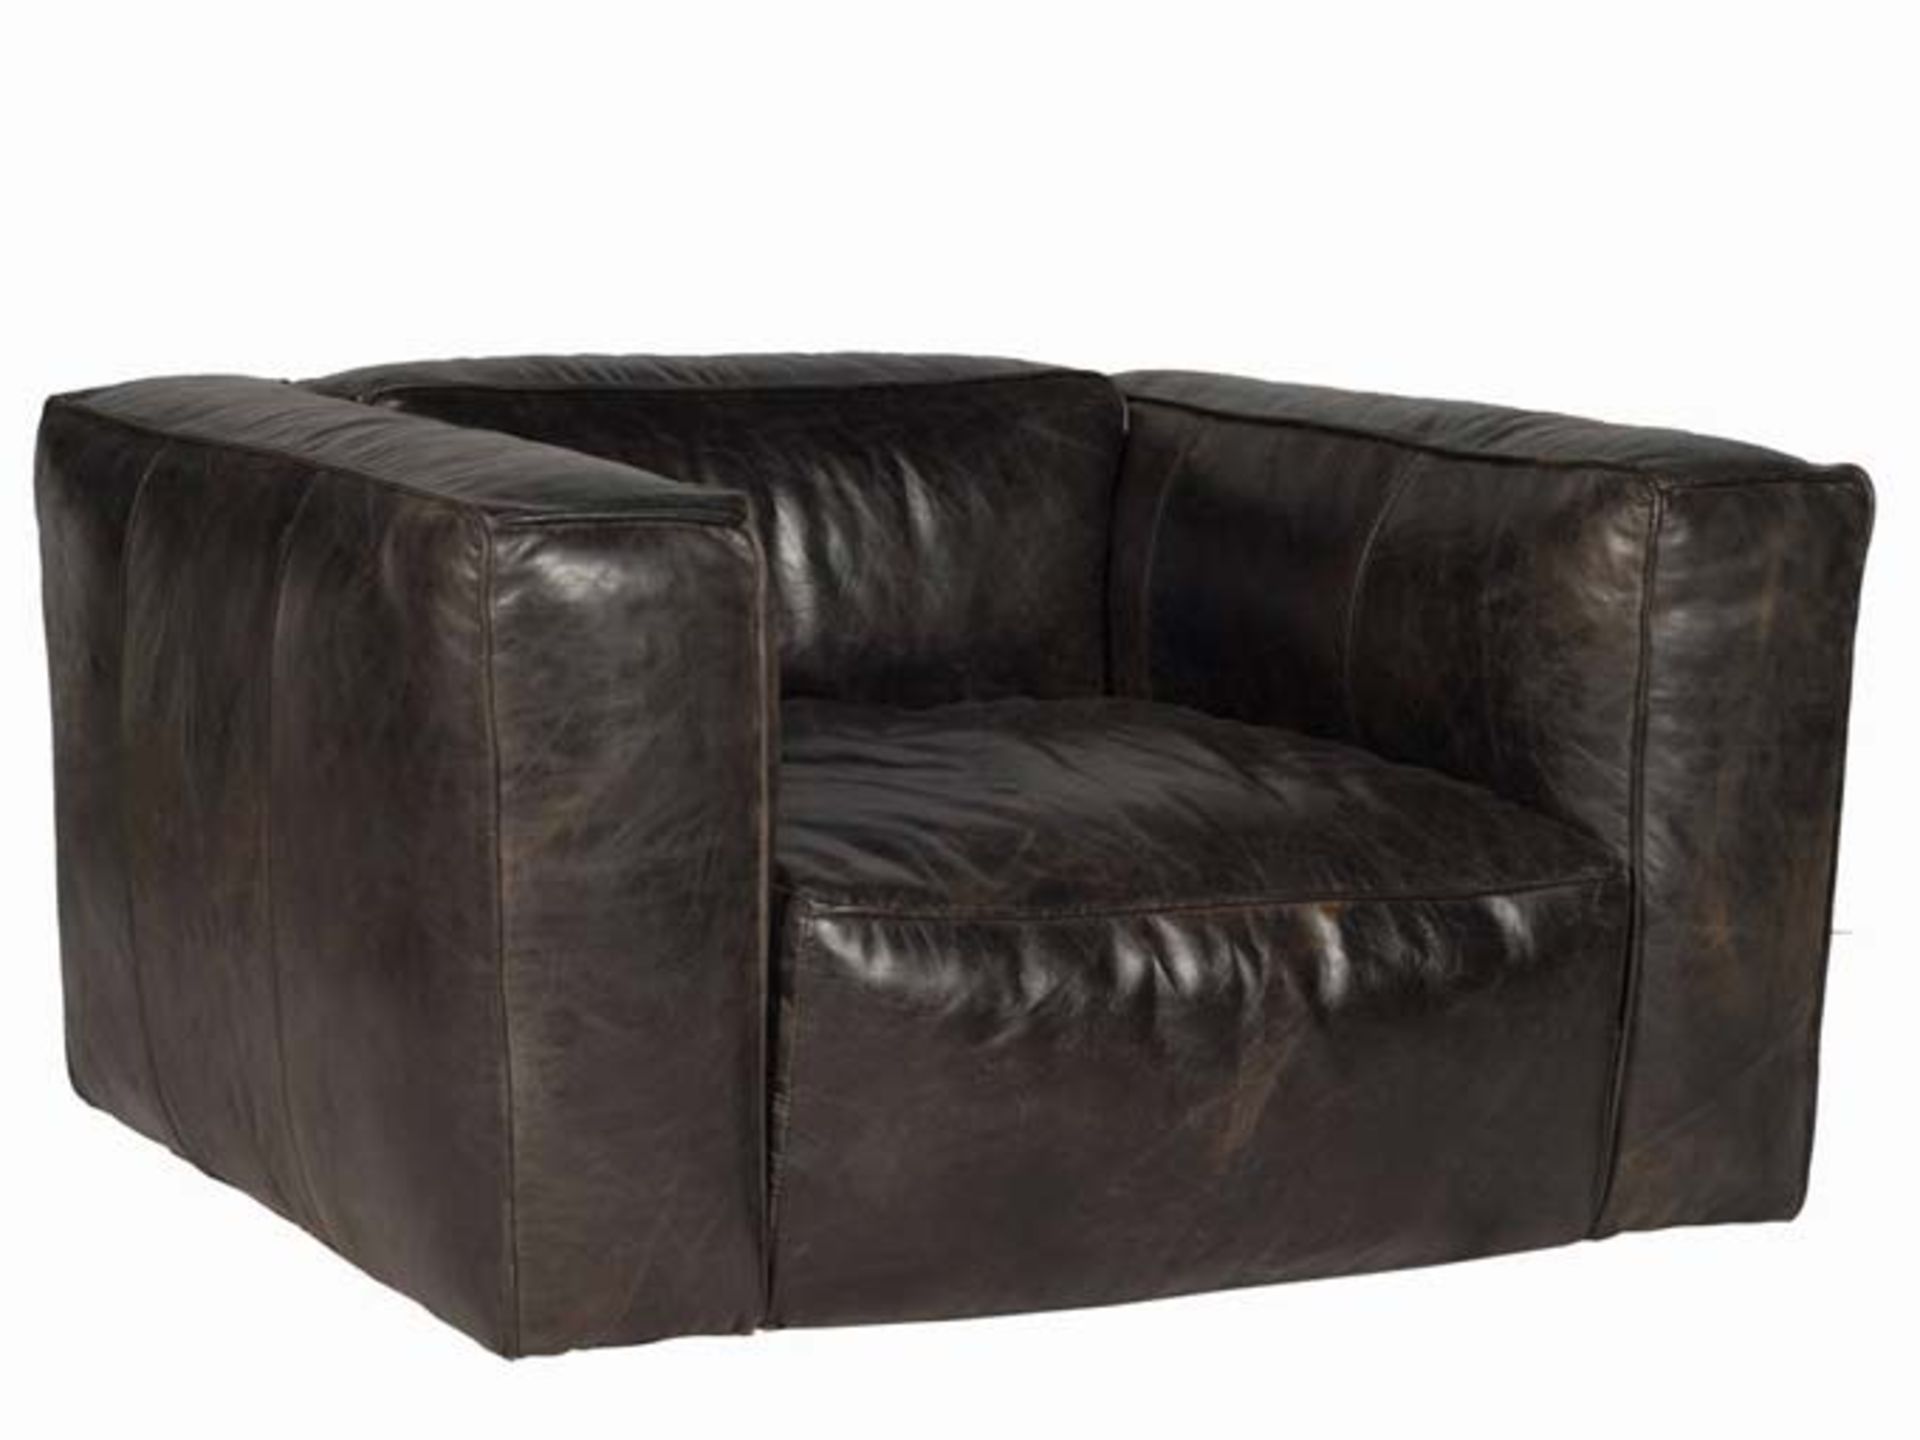 Tribeca Sofa Single Seater Collection Offers Well-Mannered Style Featuring The Natural Tones Of